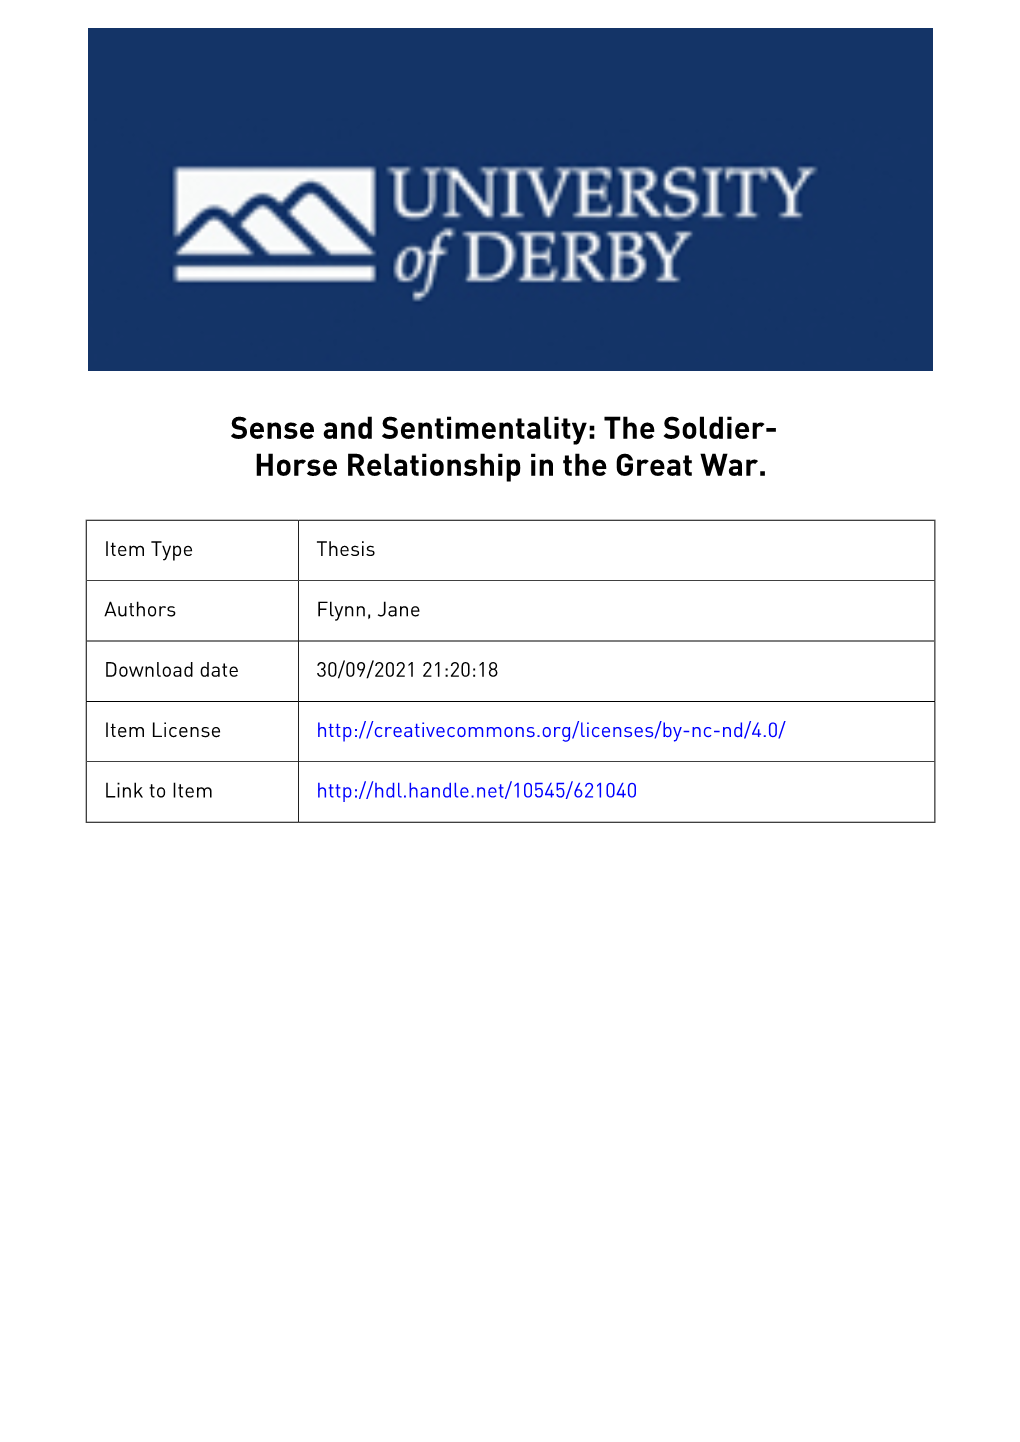 University of Derby Sense and Sentimentality: the Soldier-Horse